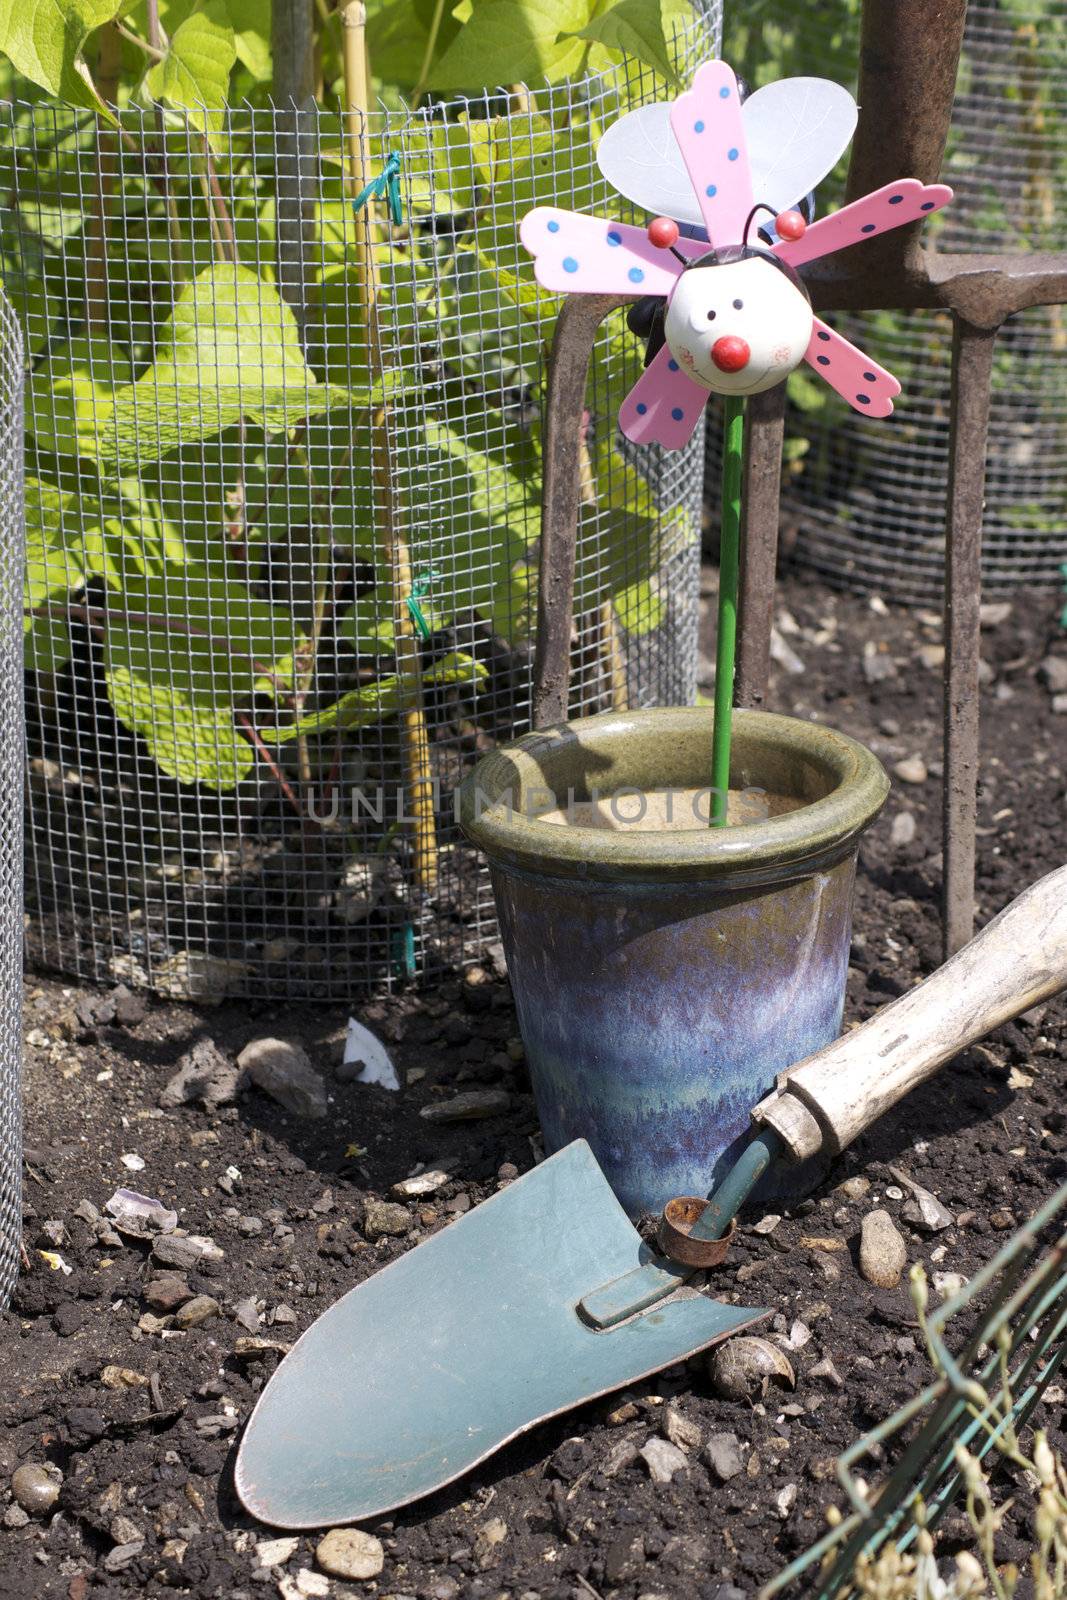 A childs plant pot decoration of a stylised bee. Set in a blue glazed ceramic plant pot in a vegetable garden amongst growing runner beans. A small hand held garden trowel lies in front of the pot.